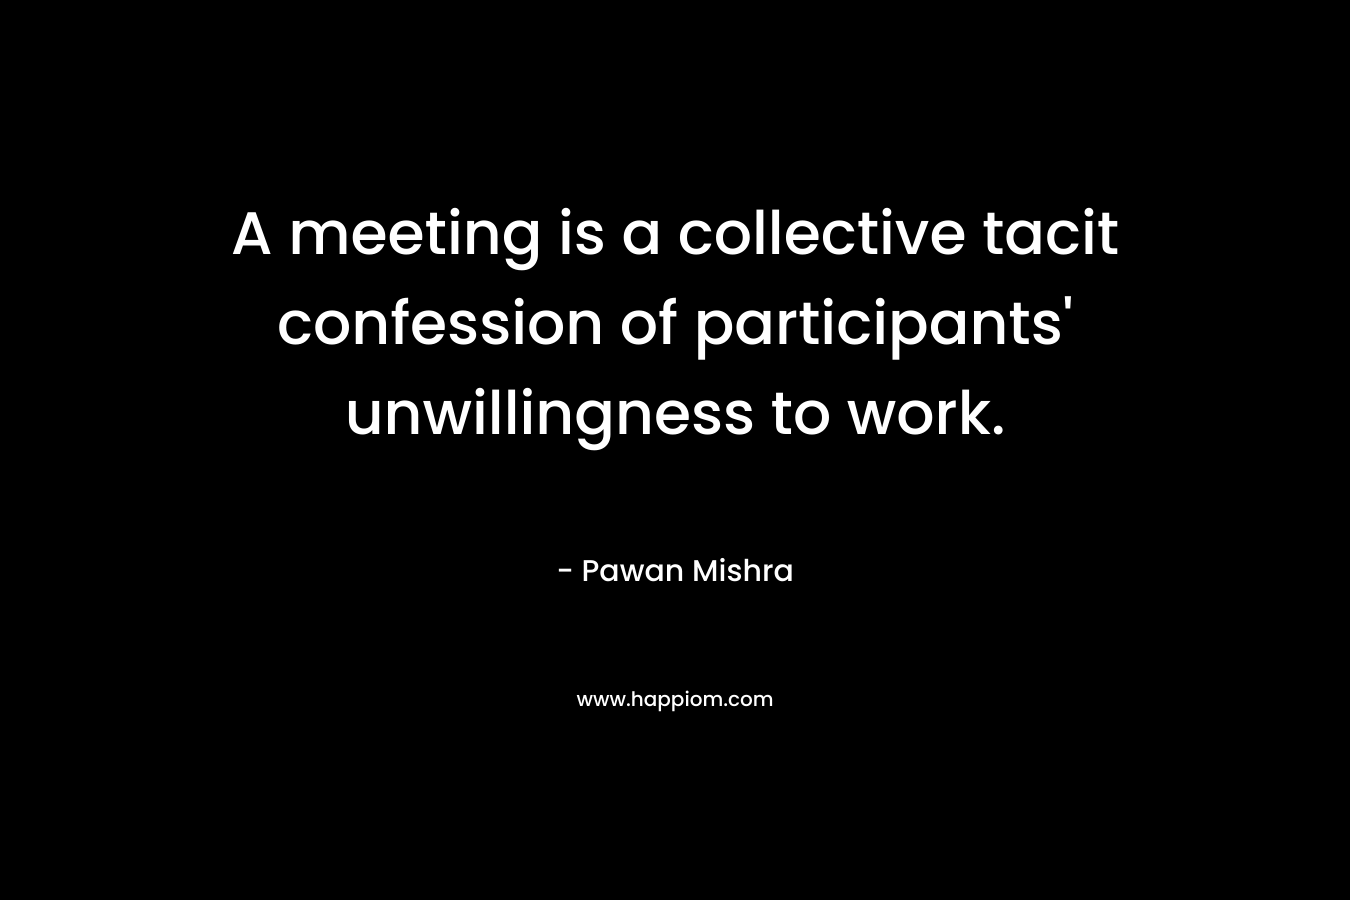 A meeting is a collective tacit confession of participants' unwillingness to work.